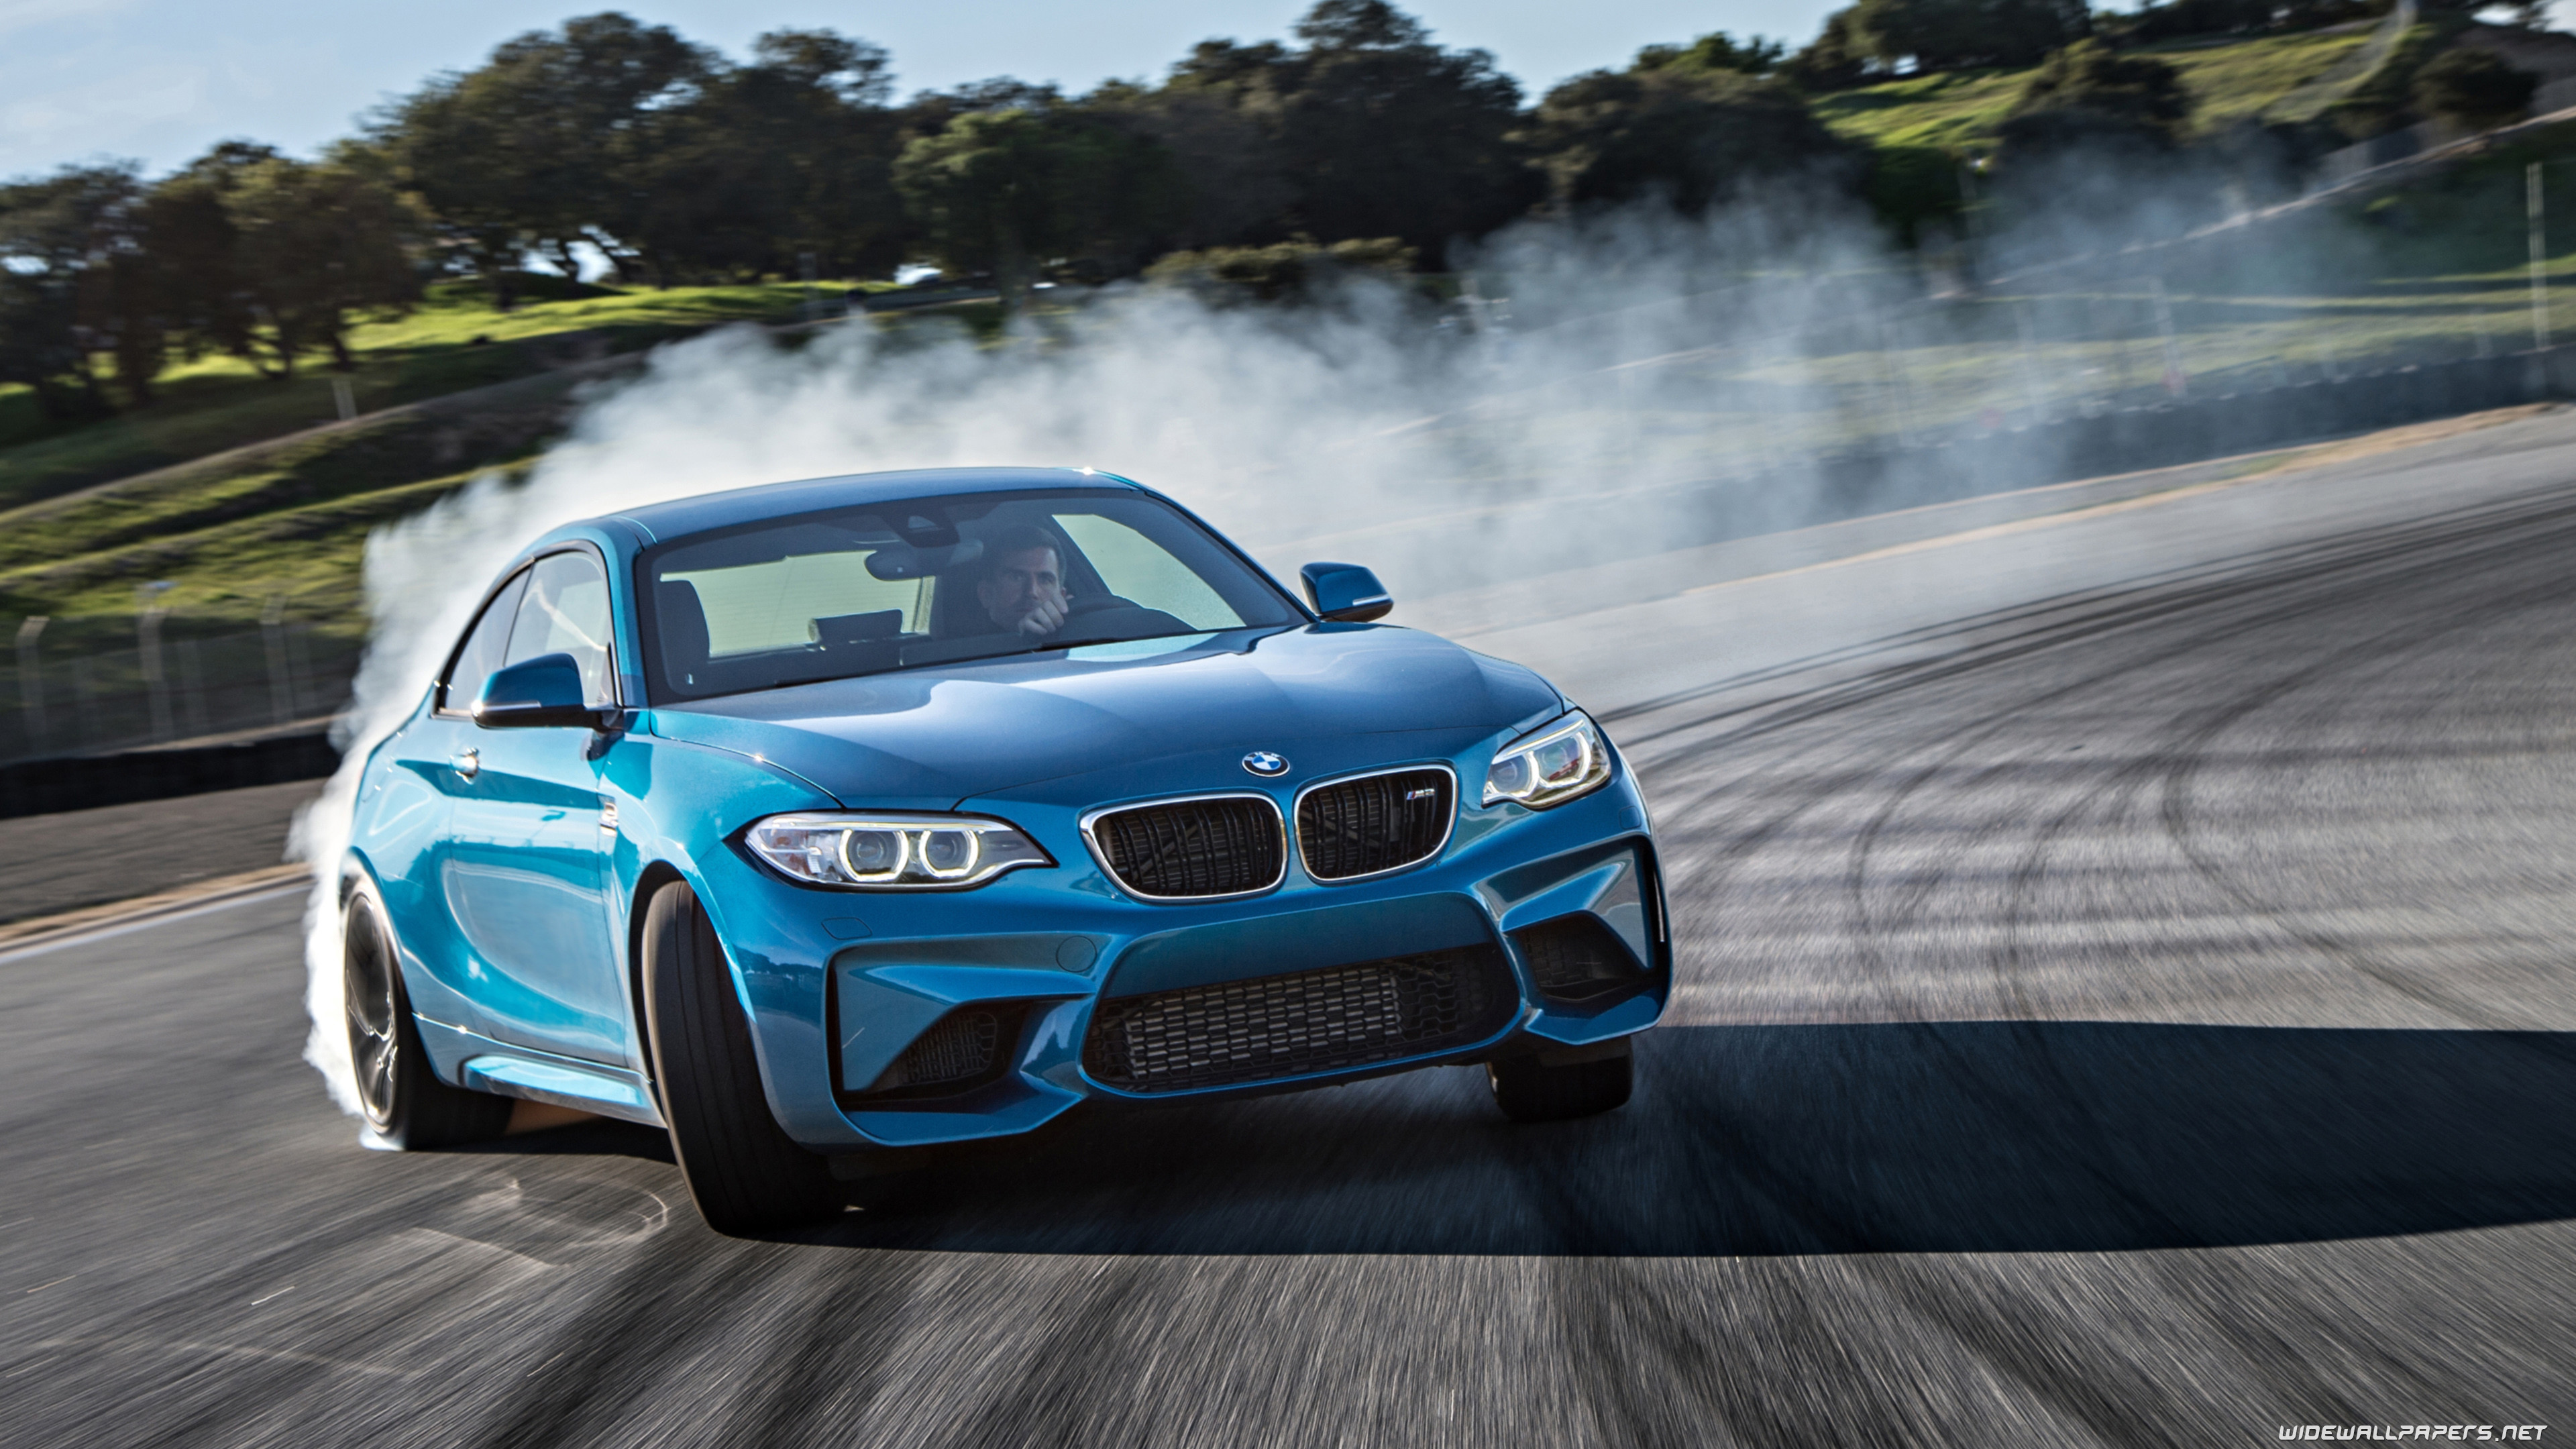 3840x2160 BMW M2 Coupe car wallpapers ...